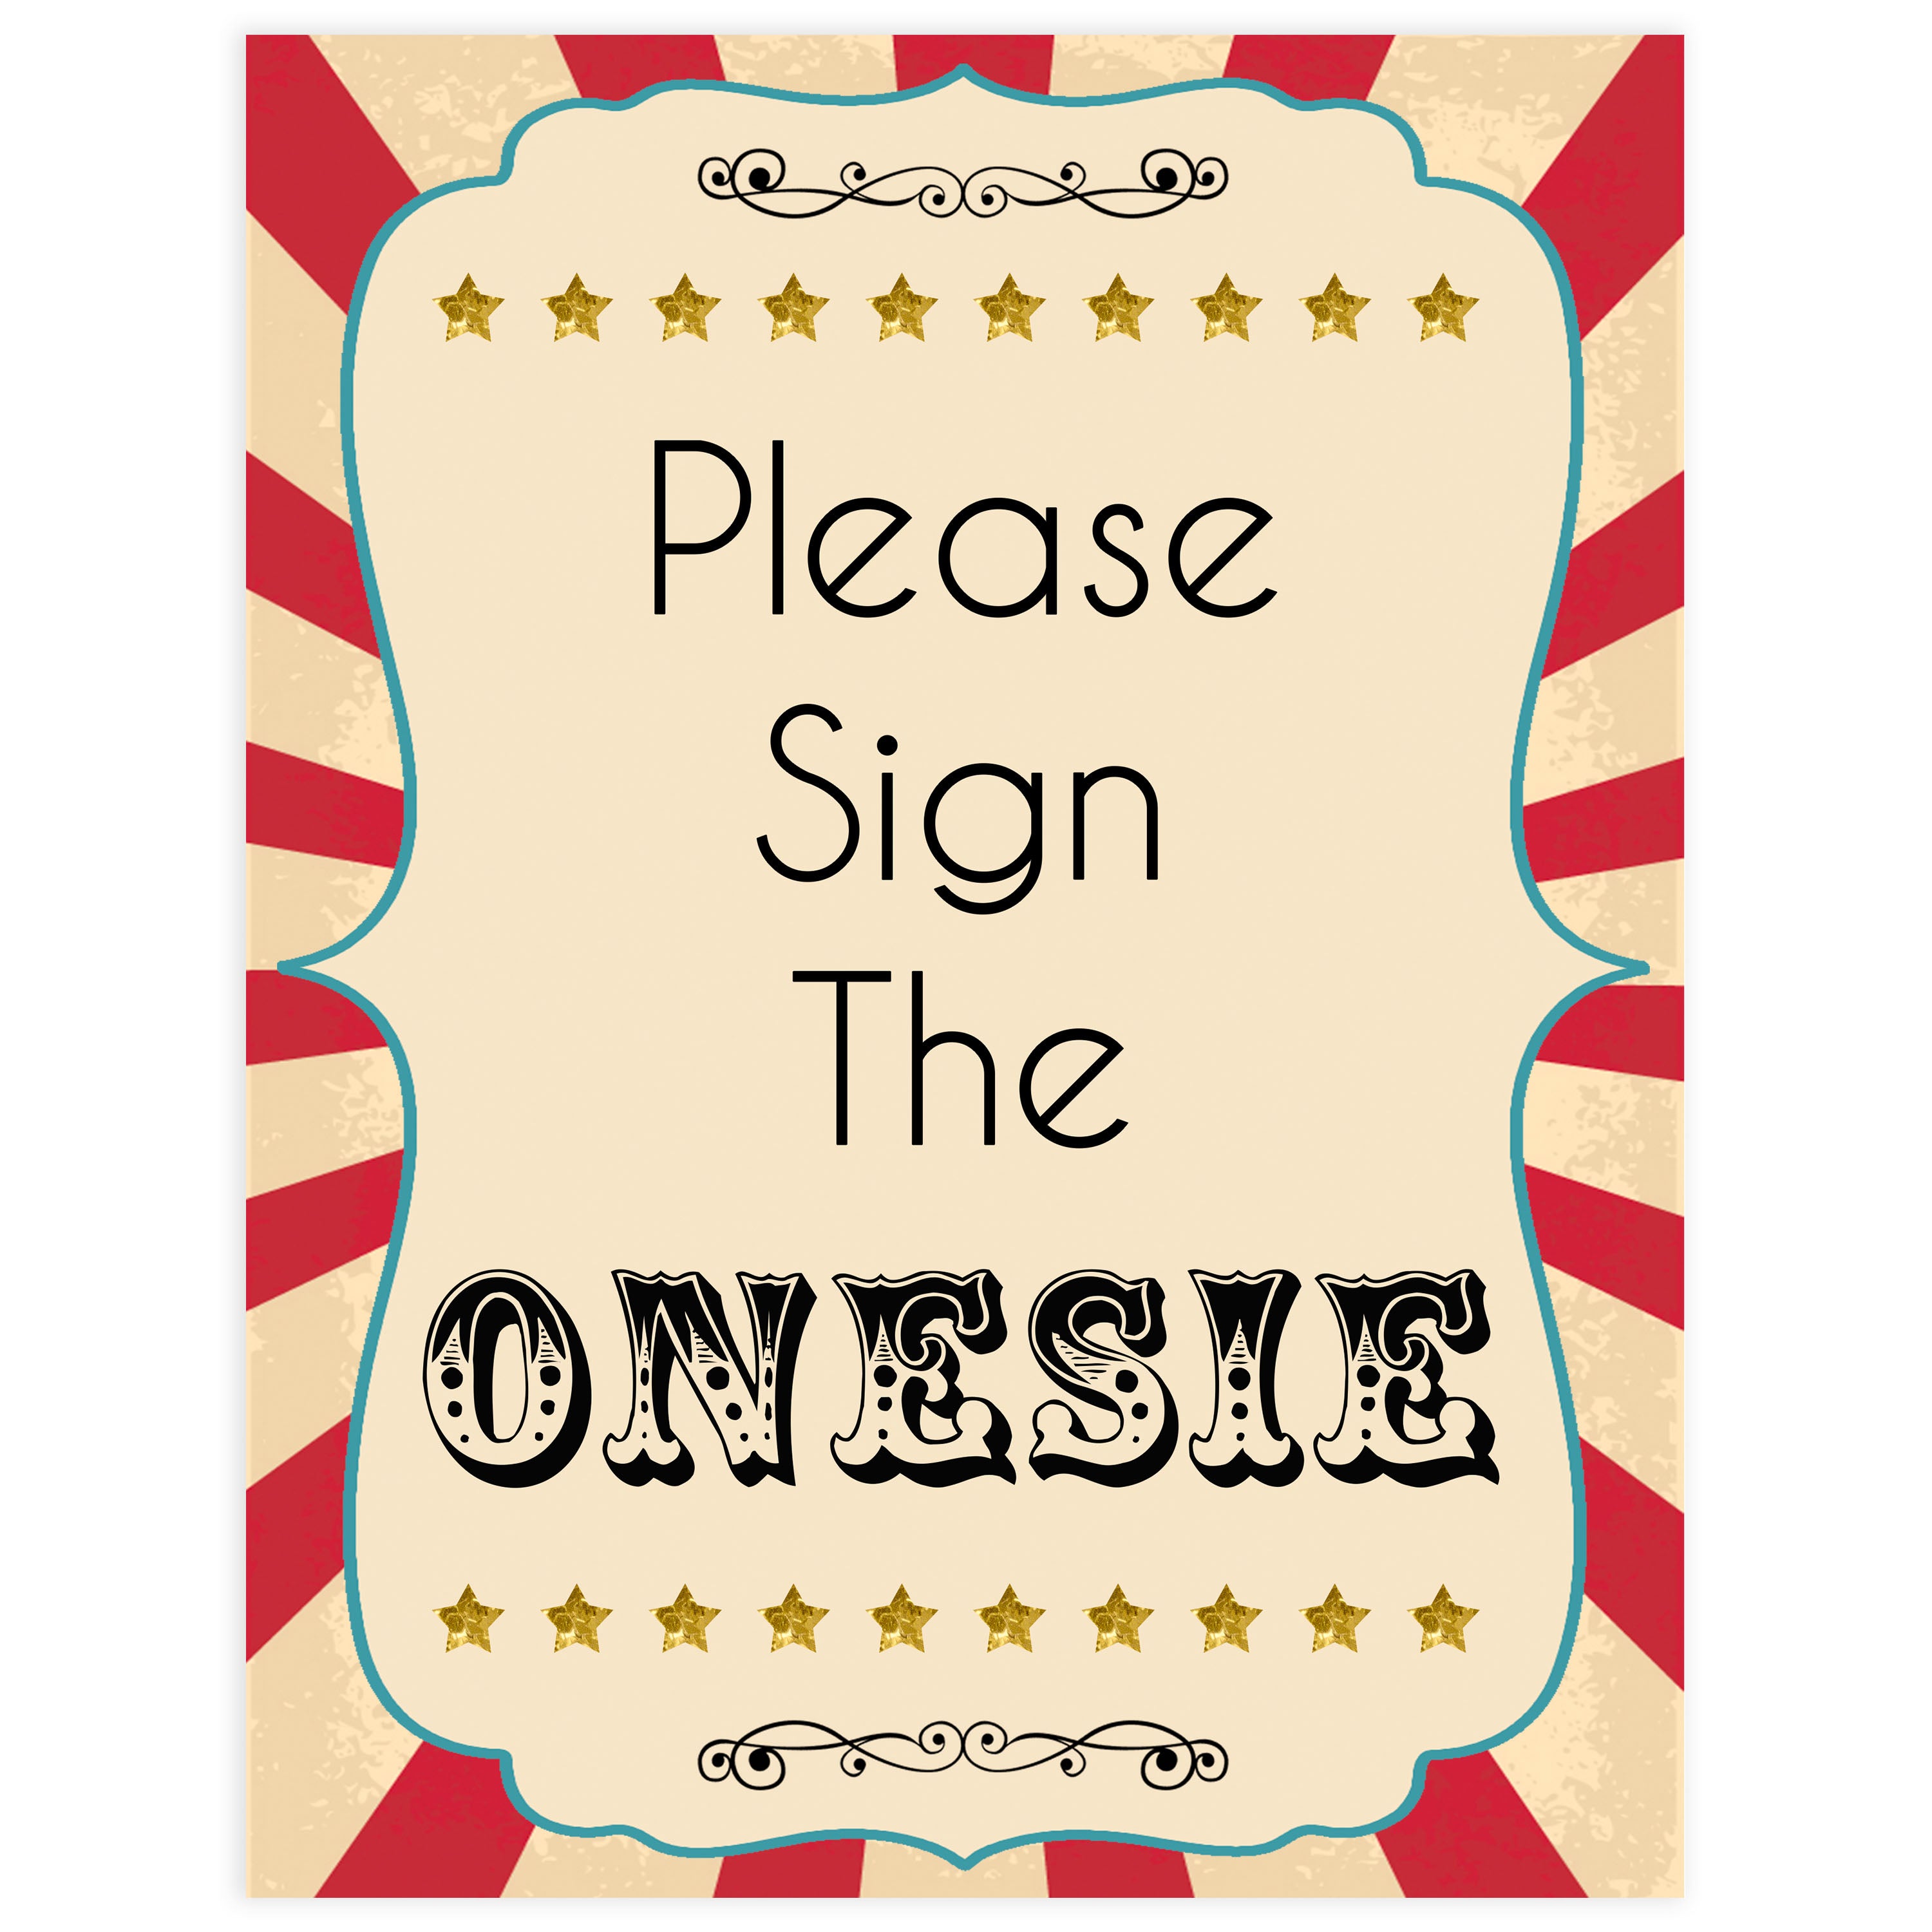 sign the onesie baby sign, onesie baby sign, Printable baby shower games, circus fun baby games, baby shower games, fun baby shower ideas, top baby shower ideas, carnival baby shower, circus baby shower ideasCircus pregnant or beer belly baby shower games, circus baby games, carnival baby games, printable baby games, fun baby games, popular baby games, carnival baby shower, carnival theme